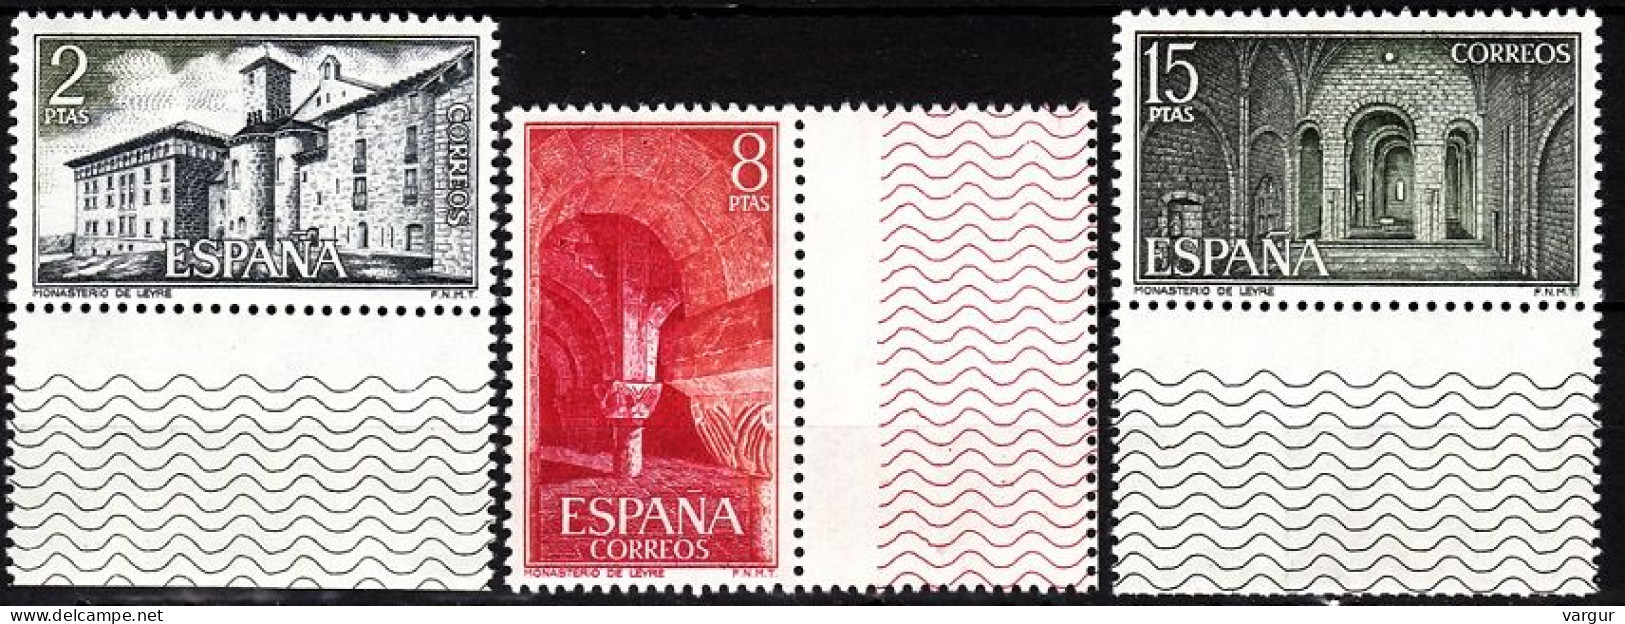 SPAIN 1974 ARCHITECTURE: Castles And Abbeys. Complete, MNH - Castles